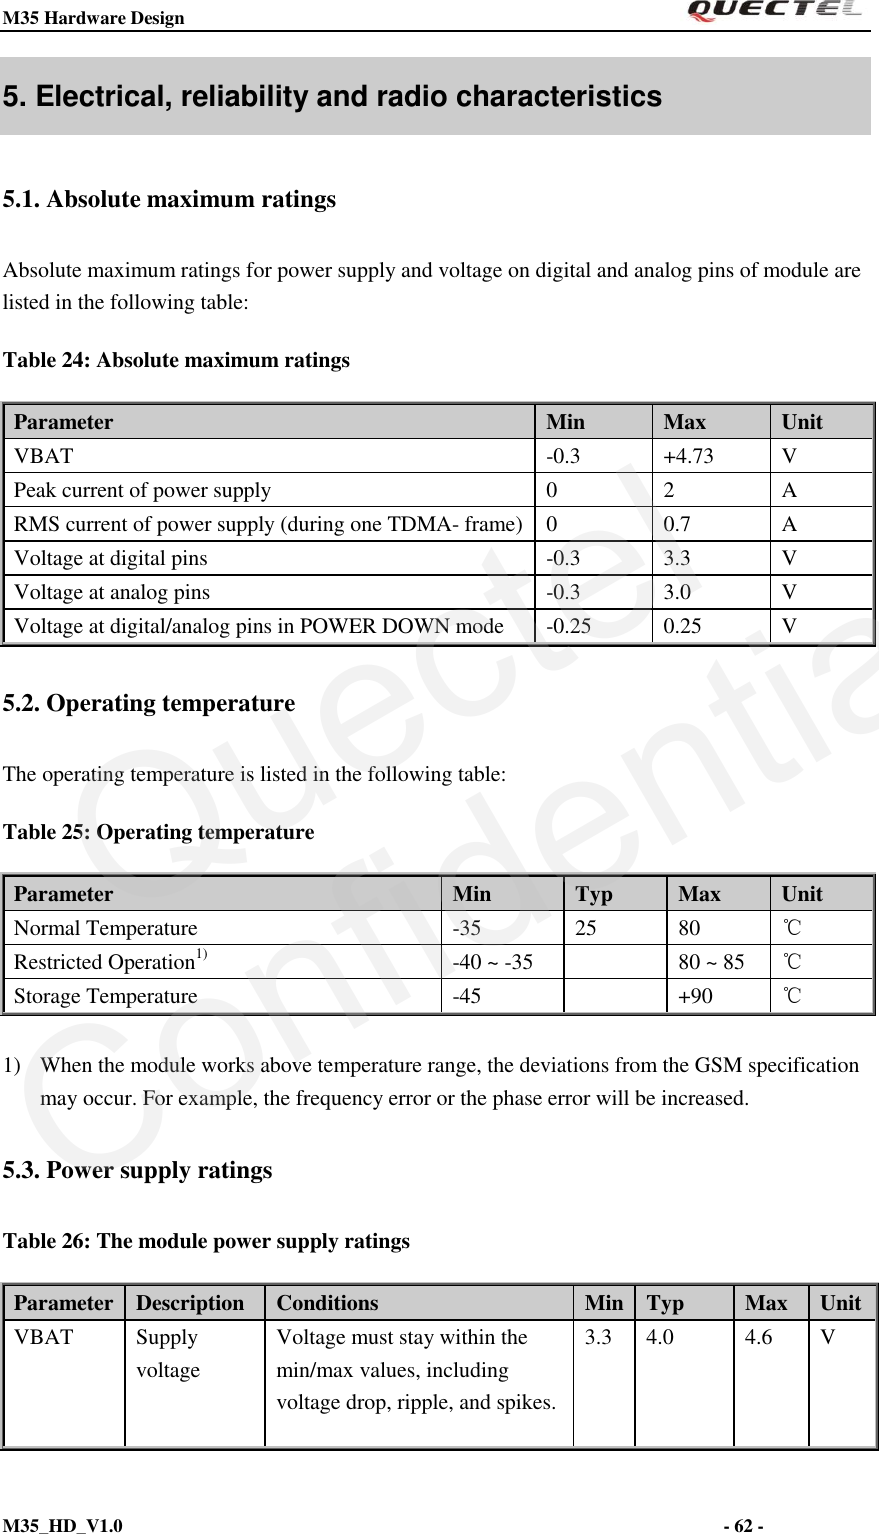 M35 Hardware Design                                                                  M35_HD_V1.0                                                                                                                         - 62 -    5. Electrical, reliability and radio characteristics 5.1. Absolute maximum ratings Absolute maximum ratings for power supply and voltage on digital and analog pins of module are listed in the following table: Table 24: Absolute maximum ratings Parameter Min Max Unit VBAT -0.3 +4.73 V Peak current of power supply 0 2 A RMS current of power supply (during one TDMA- frame) 0 0.7 A Voltage at digital pins -0.3 3.3 V Voltage at analog pins -0.3 3.0 V Voltage at digital/analog pins in POWER DOWN mode -0.25 0.25 V 5.2. Operating temperature The operating temperature is listed in the following table: Table 25: Operating temperature Parameter Min Typ Max Unit Normal Temperature -35 25 80 ℃ Restricted Operation1) -40 ~ -35  80 ~ 85 ℃ Storage Temperature -45  +90 ℃  1) When the module works above temperature range, the deviations from the GSM specification may occur. For example, the frequency error or the phase error will be increased. 5.3. Power supply ratings   Table 26: The module power supply ratings Parameter Description Conditions Min Typ Max Unit VBAT Supply voltage Voltage must stay within the min/max values, including voltage drop, ripple, and spikes. 3.3 4.0 4.6 V QuectelConfidential